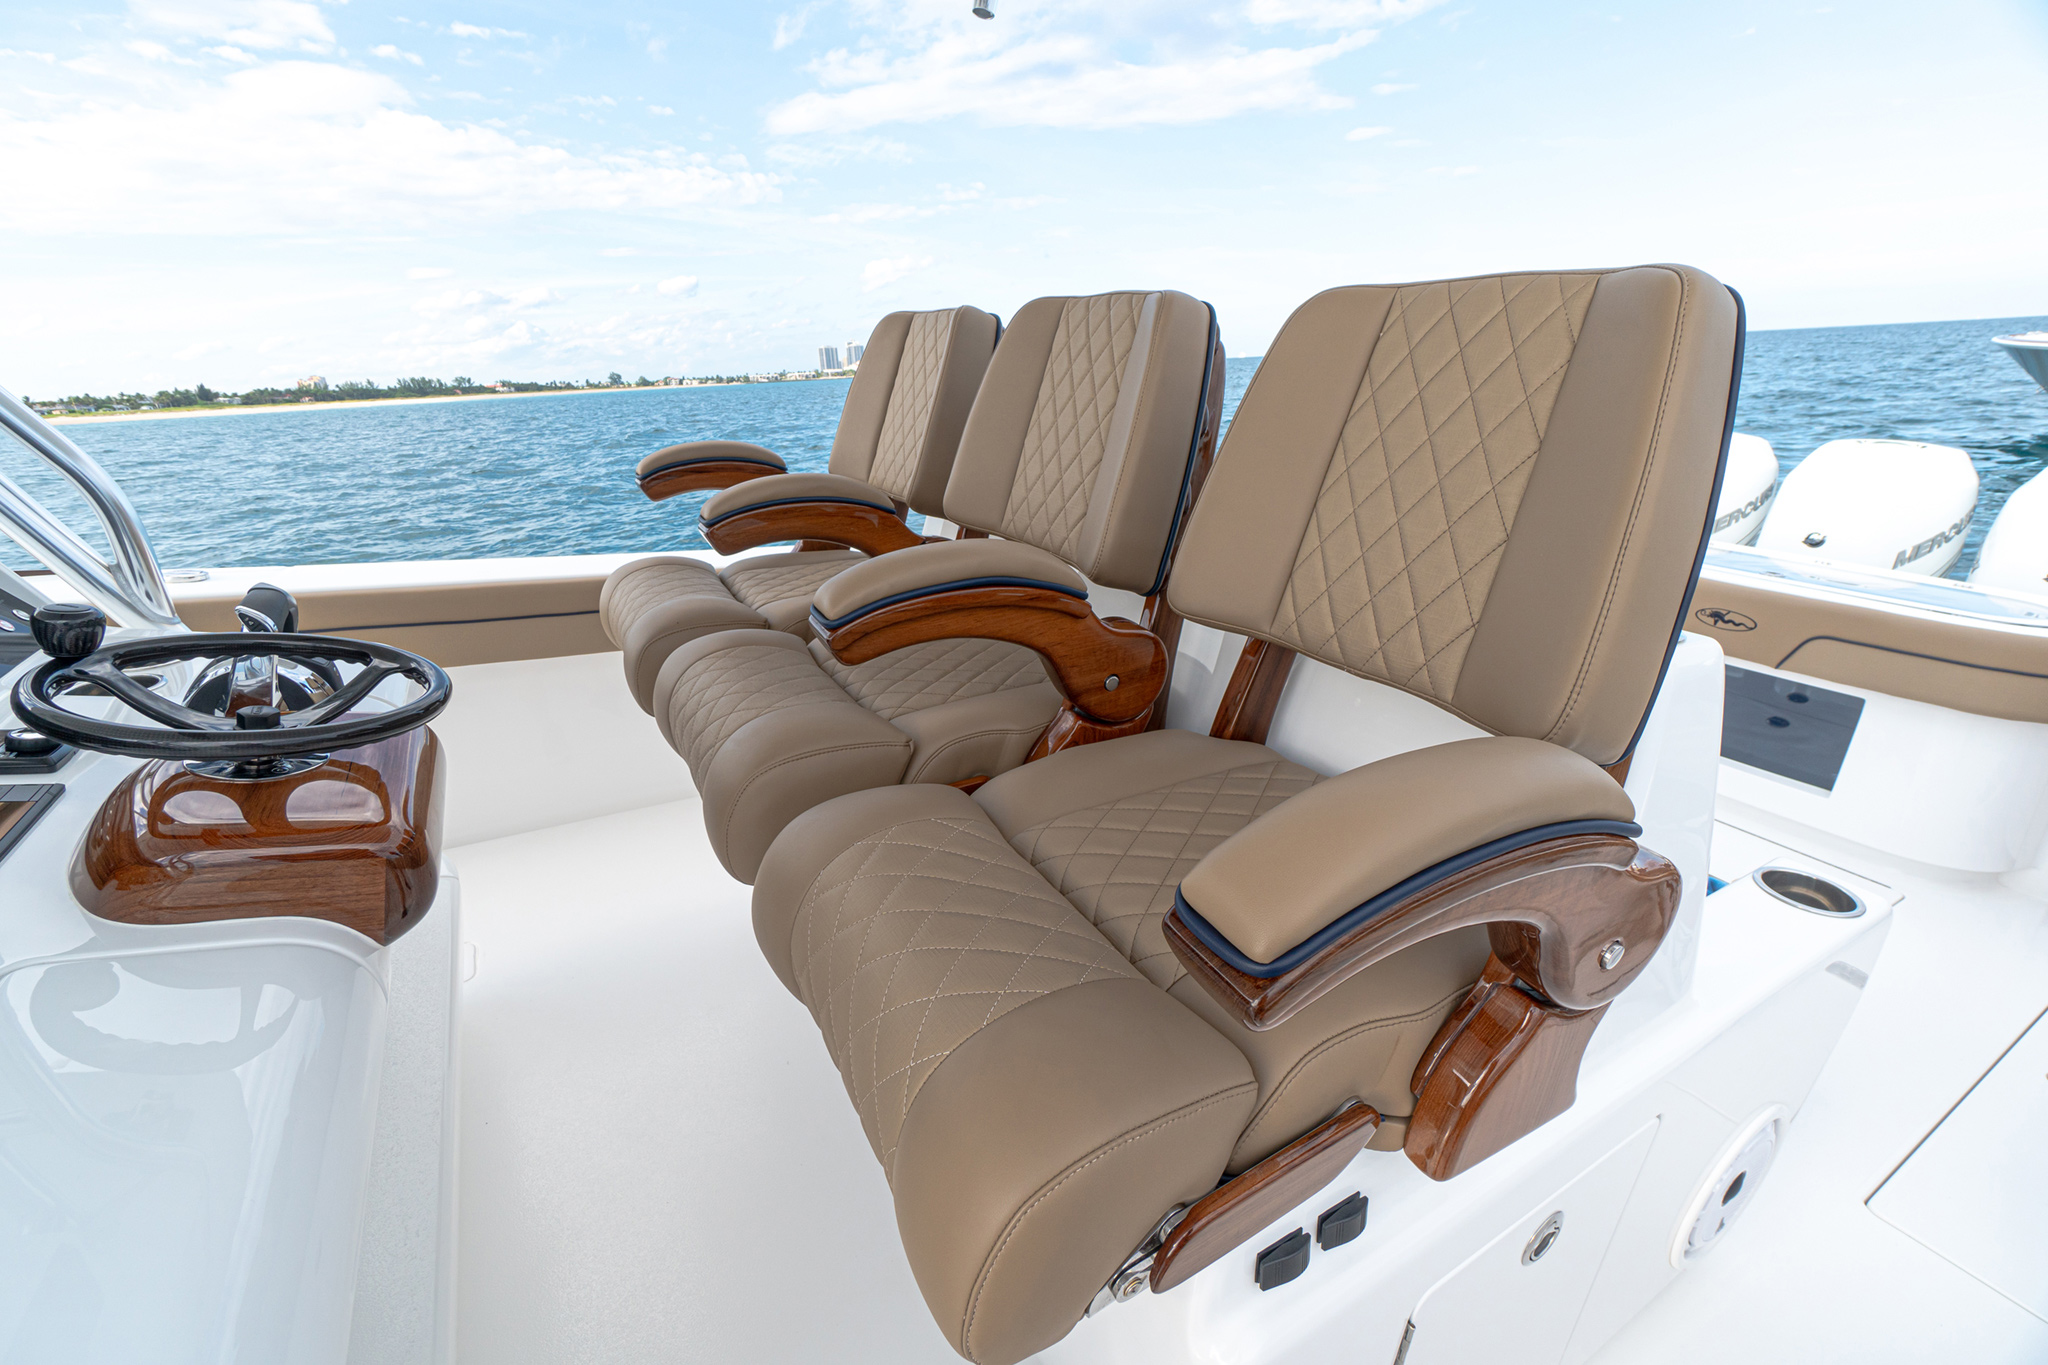 Premium upholstery with Bentley stitching and teak armrests.